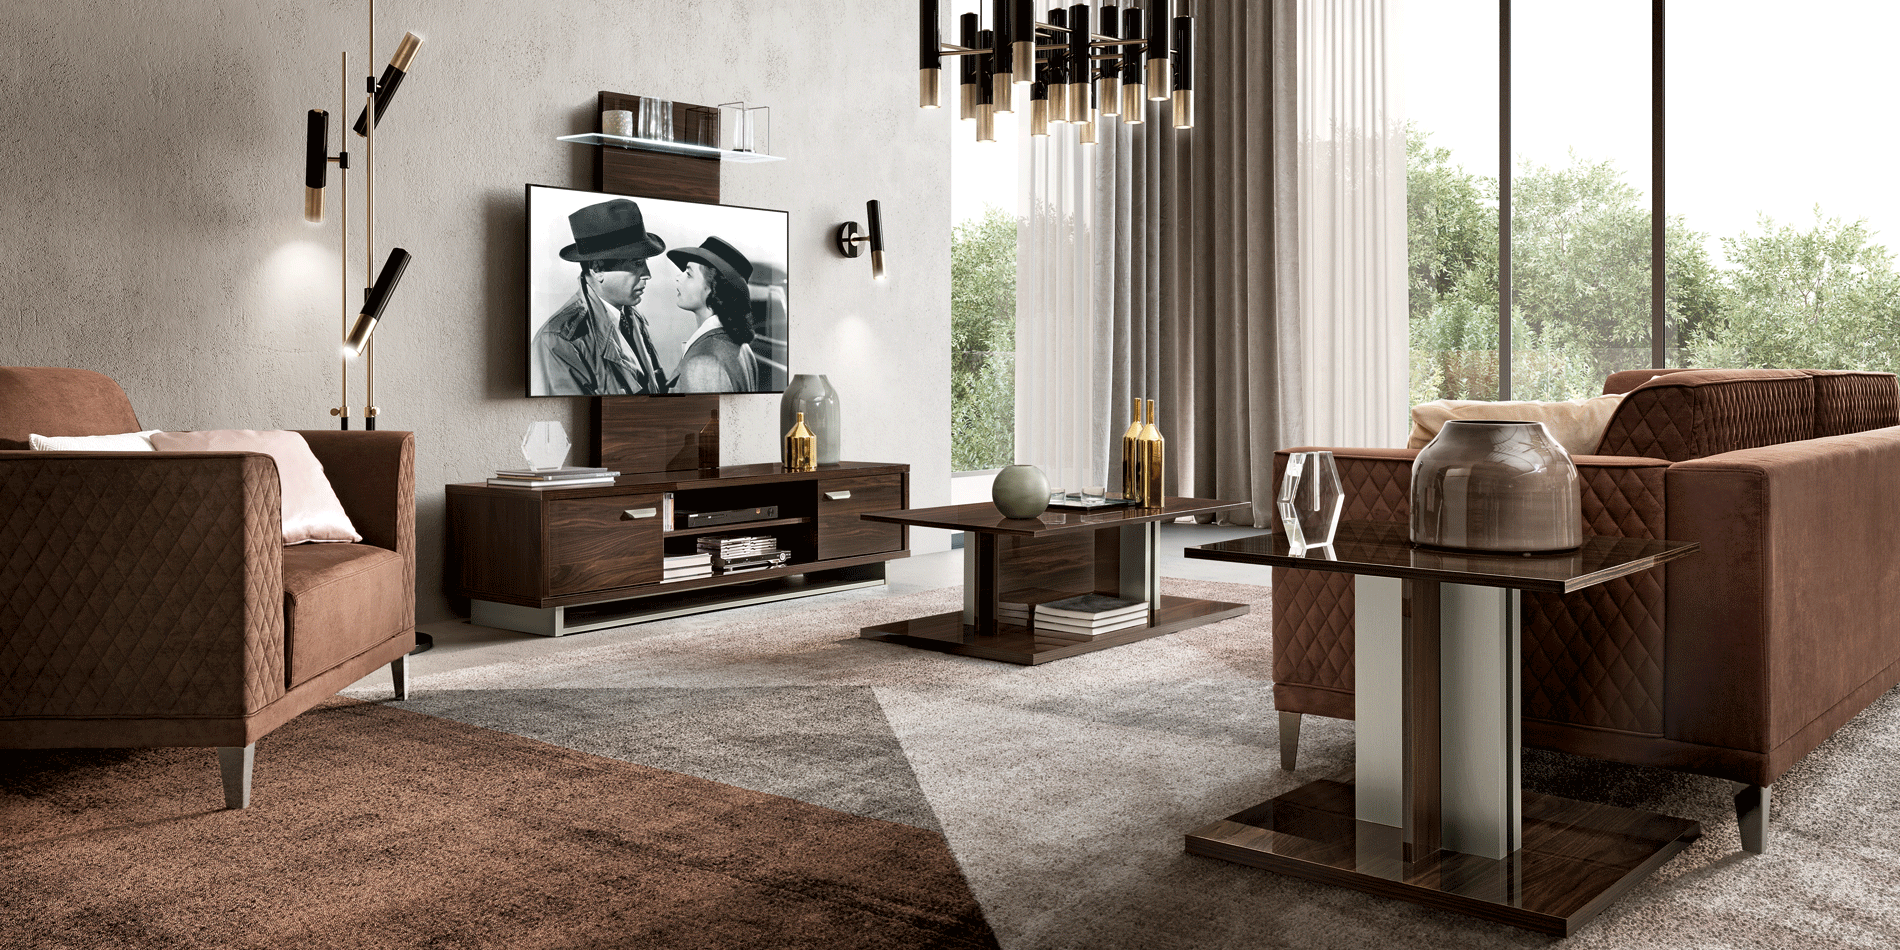 Brands Camel Classic Collection, Italy Volare Entertainment center Dark Walnut/Nickel Additional items